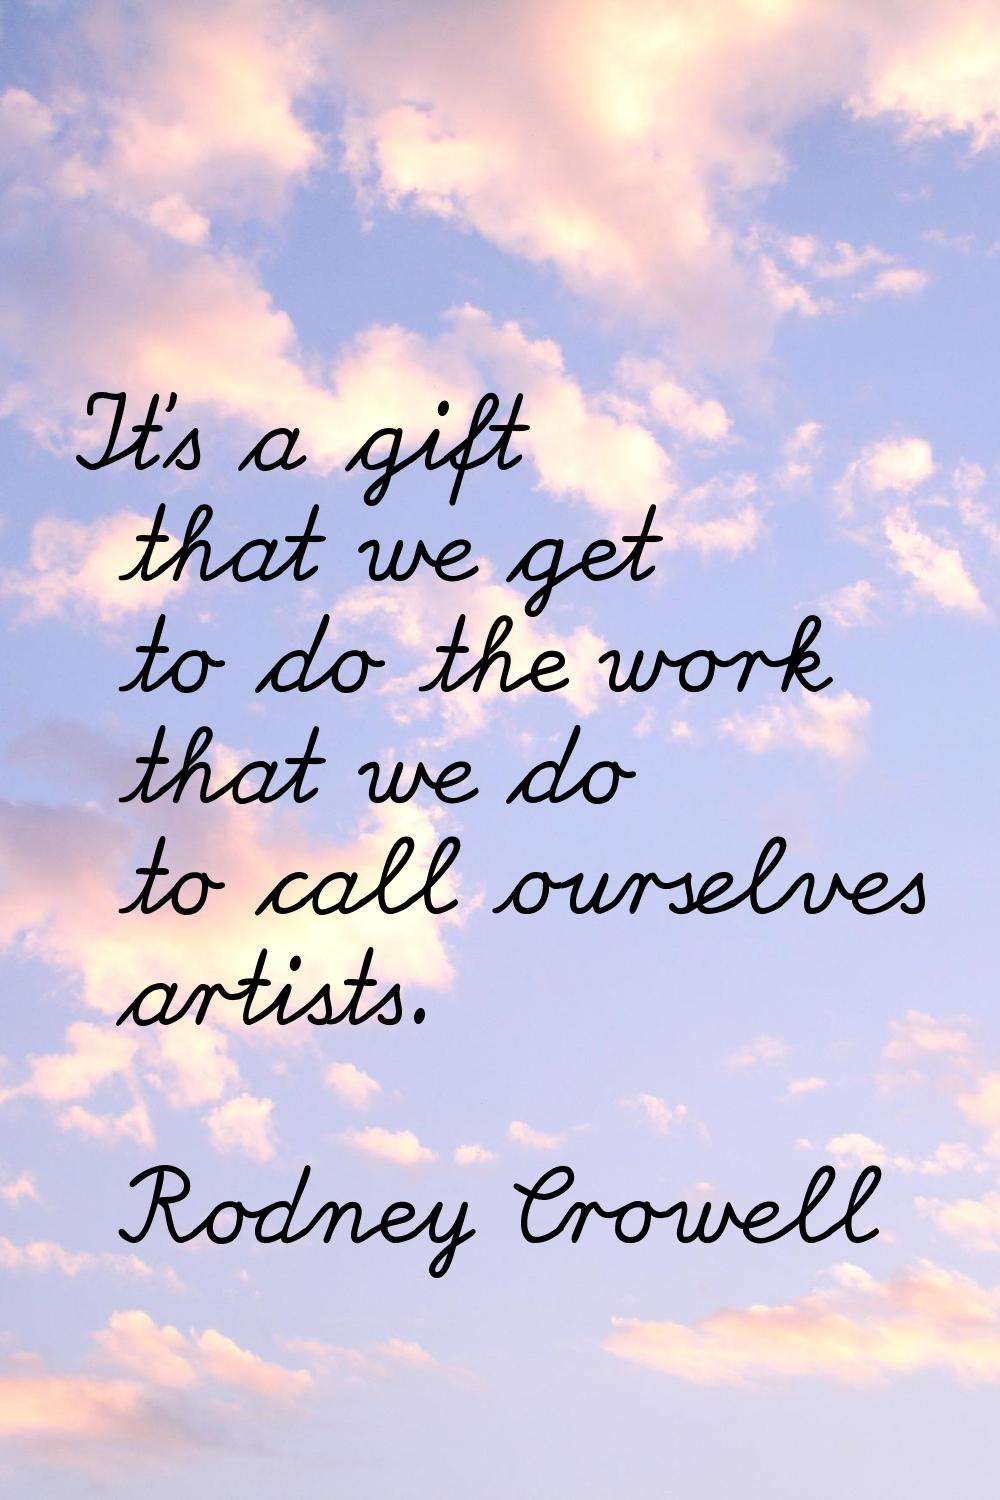 It's a gift that we get to do the work that we do to call ourselves artists.